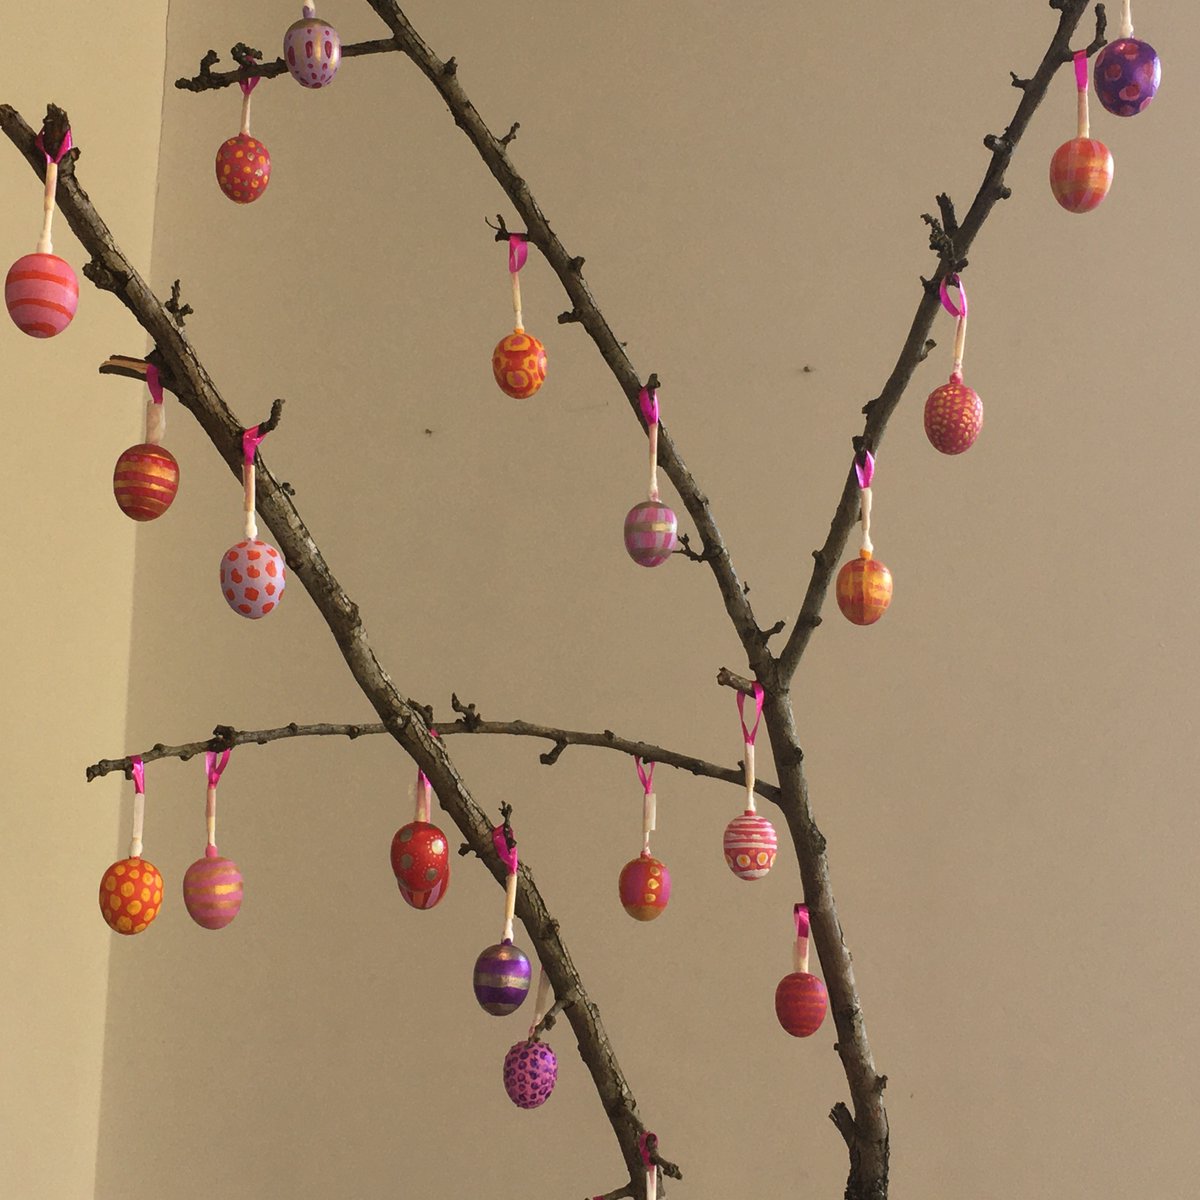 Our Easter tree this year is made from my ‘social distancing stick’ instead of the traditional pussy willow (which we couldn’t find). As always my girls wanted to know ‘why eggs and rabbits?' I normally ramble about symbols of new life. This year I decided to do some digging. 1/7